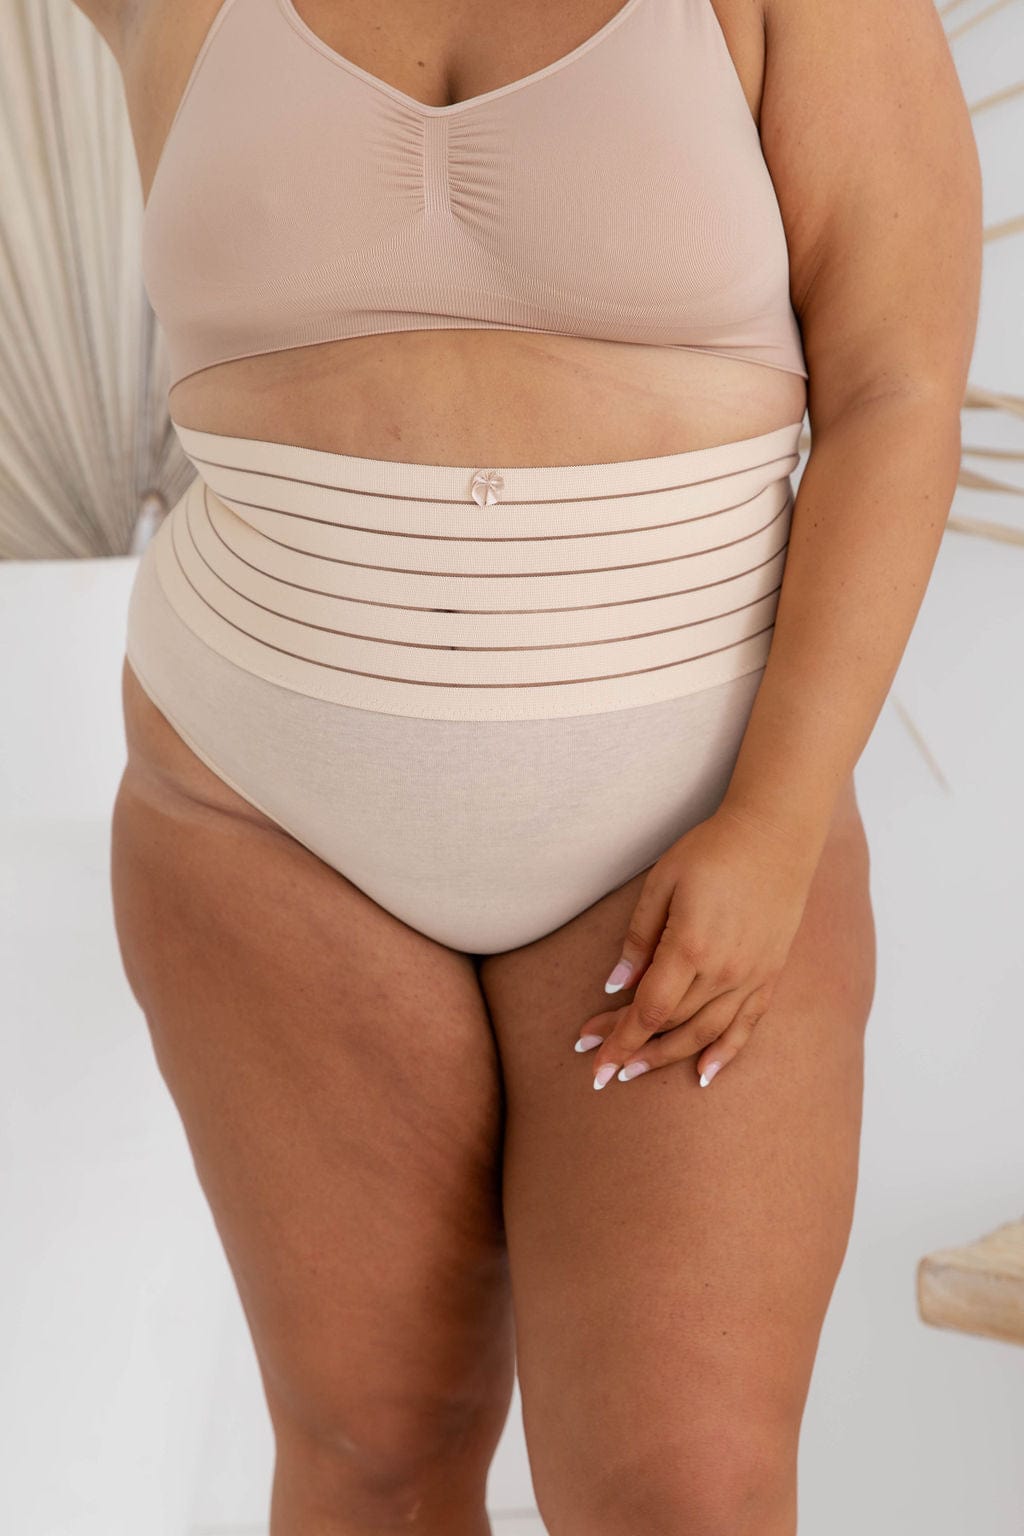 High Waisted Shaping Nude Underwear - $14.00 - Underwear - Naked Curve